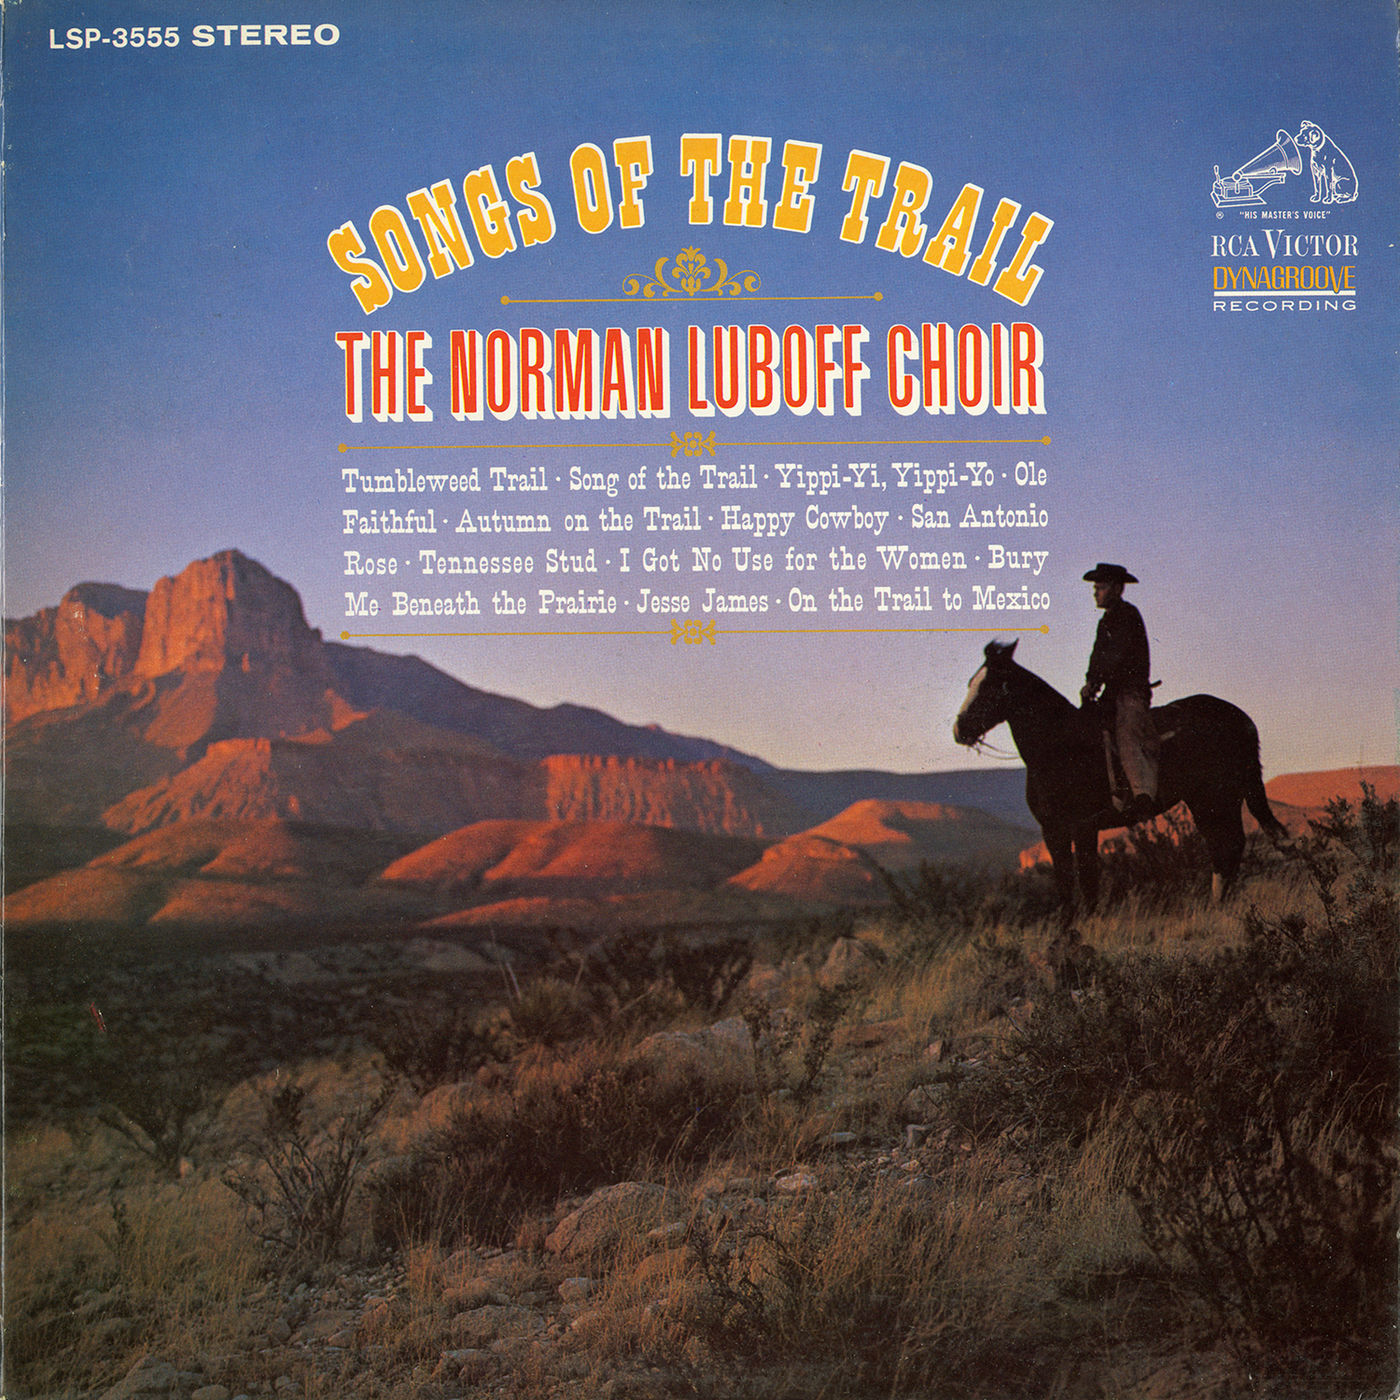 The Norman Luboff Choir – Songs of the Trail